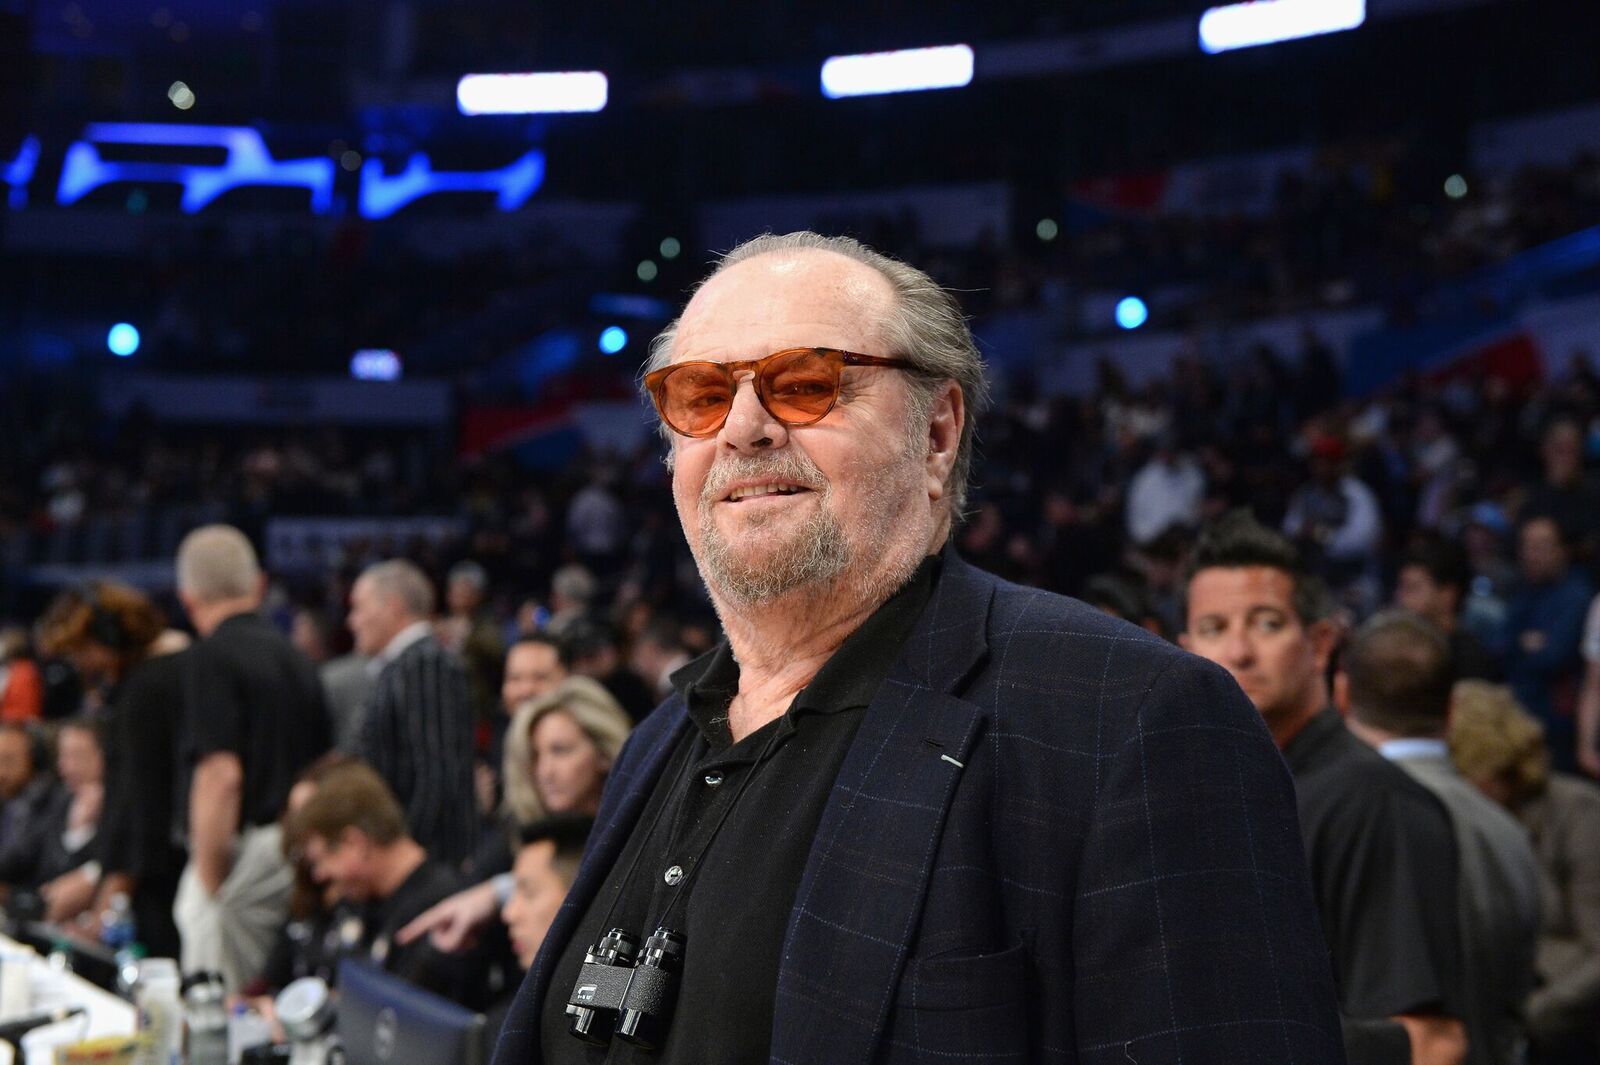 Jack Nicholson attends the NBA All-Star Game 2018 at Staples Center on February 18, 2018 | Photo: Getty Images